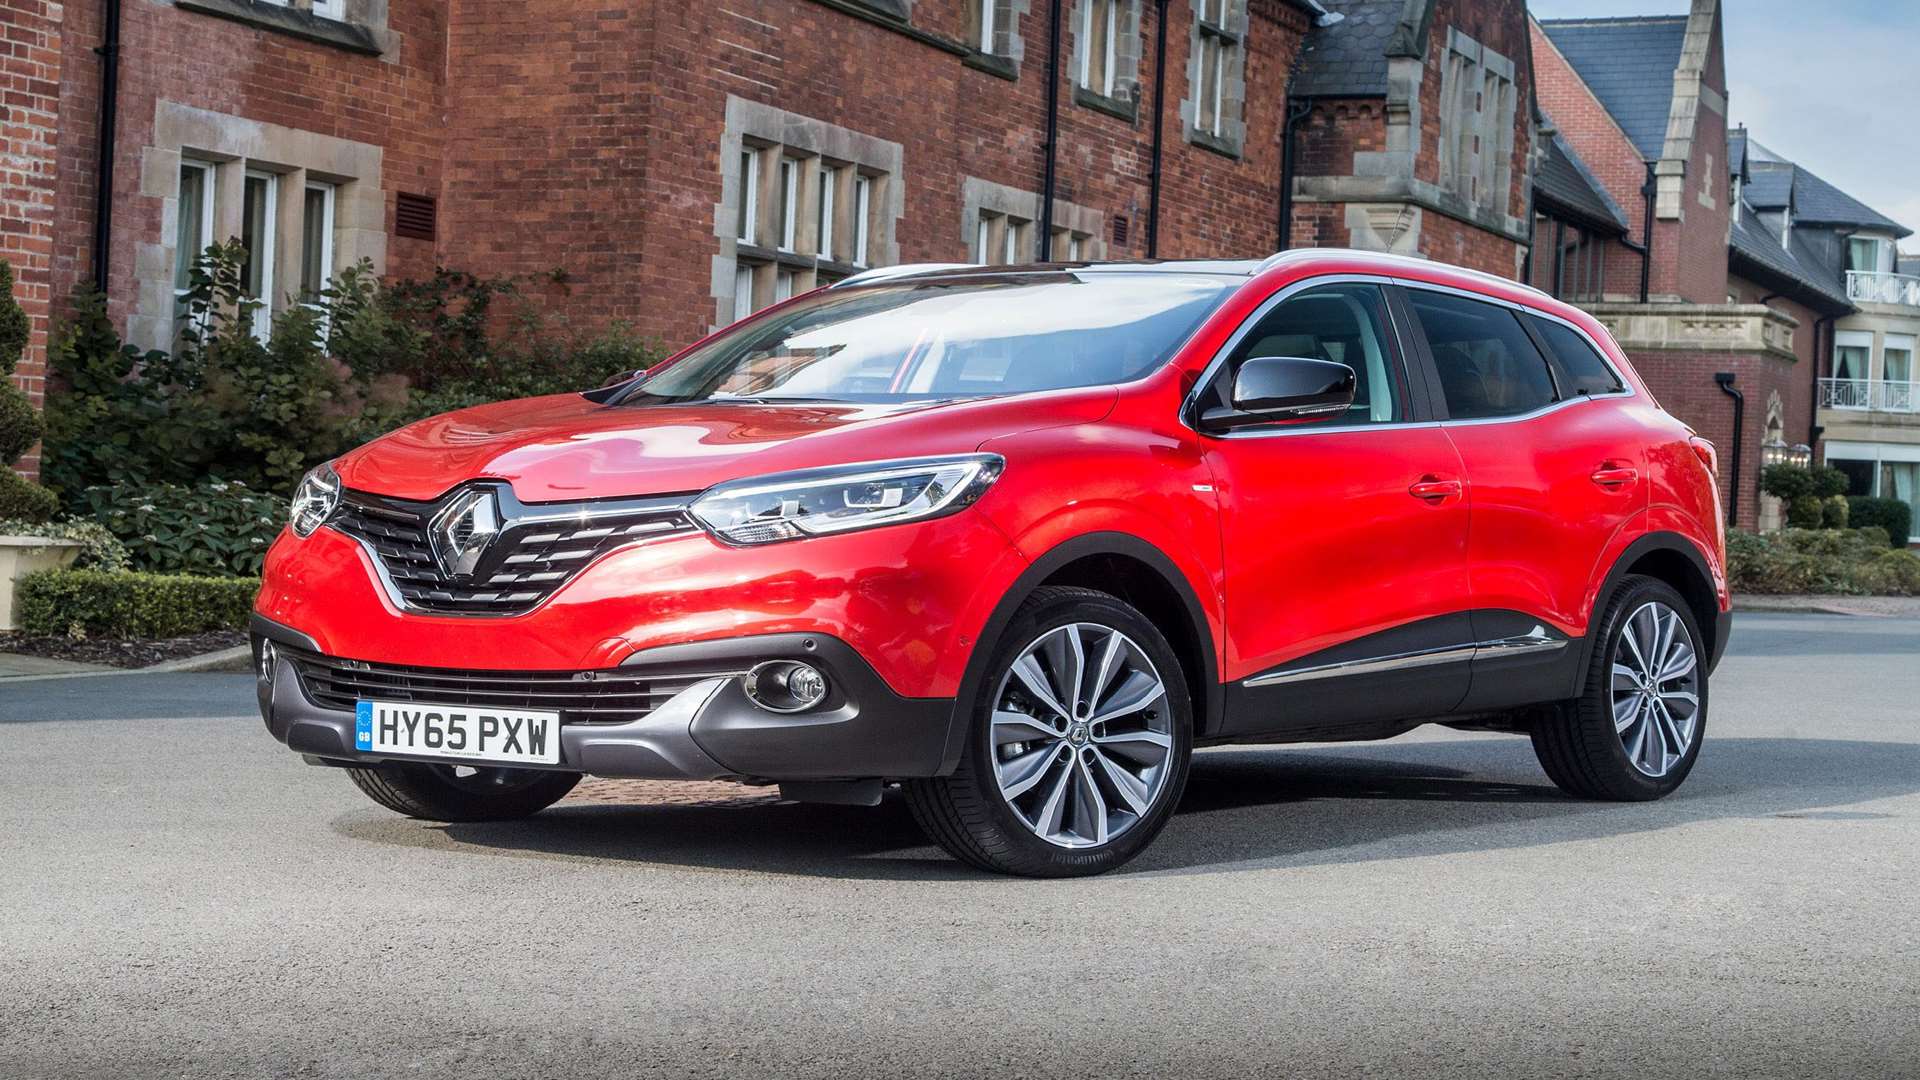 The Kadjar bold's design stands out from the crowd